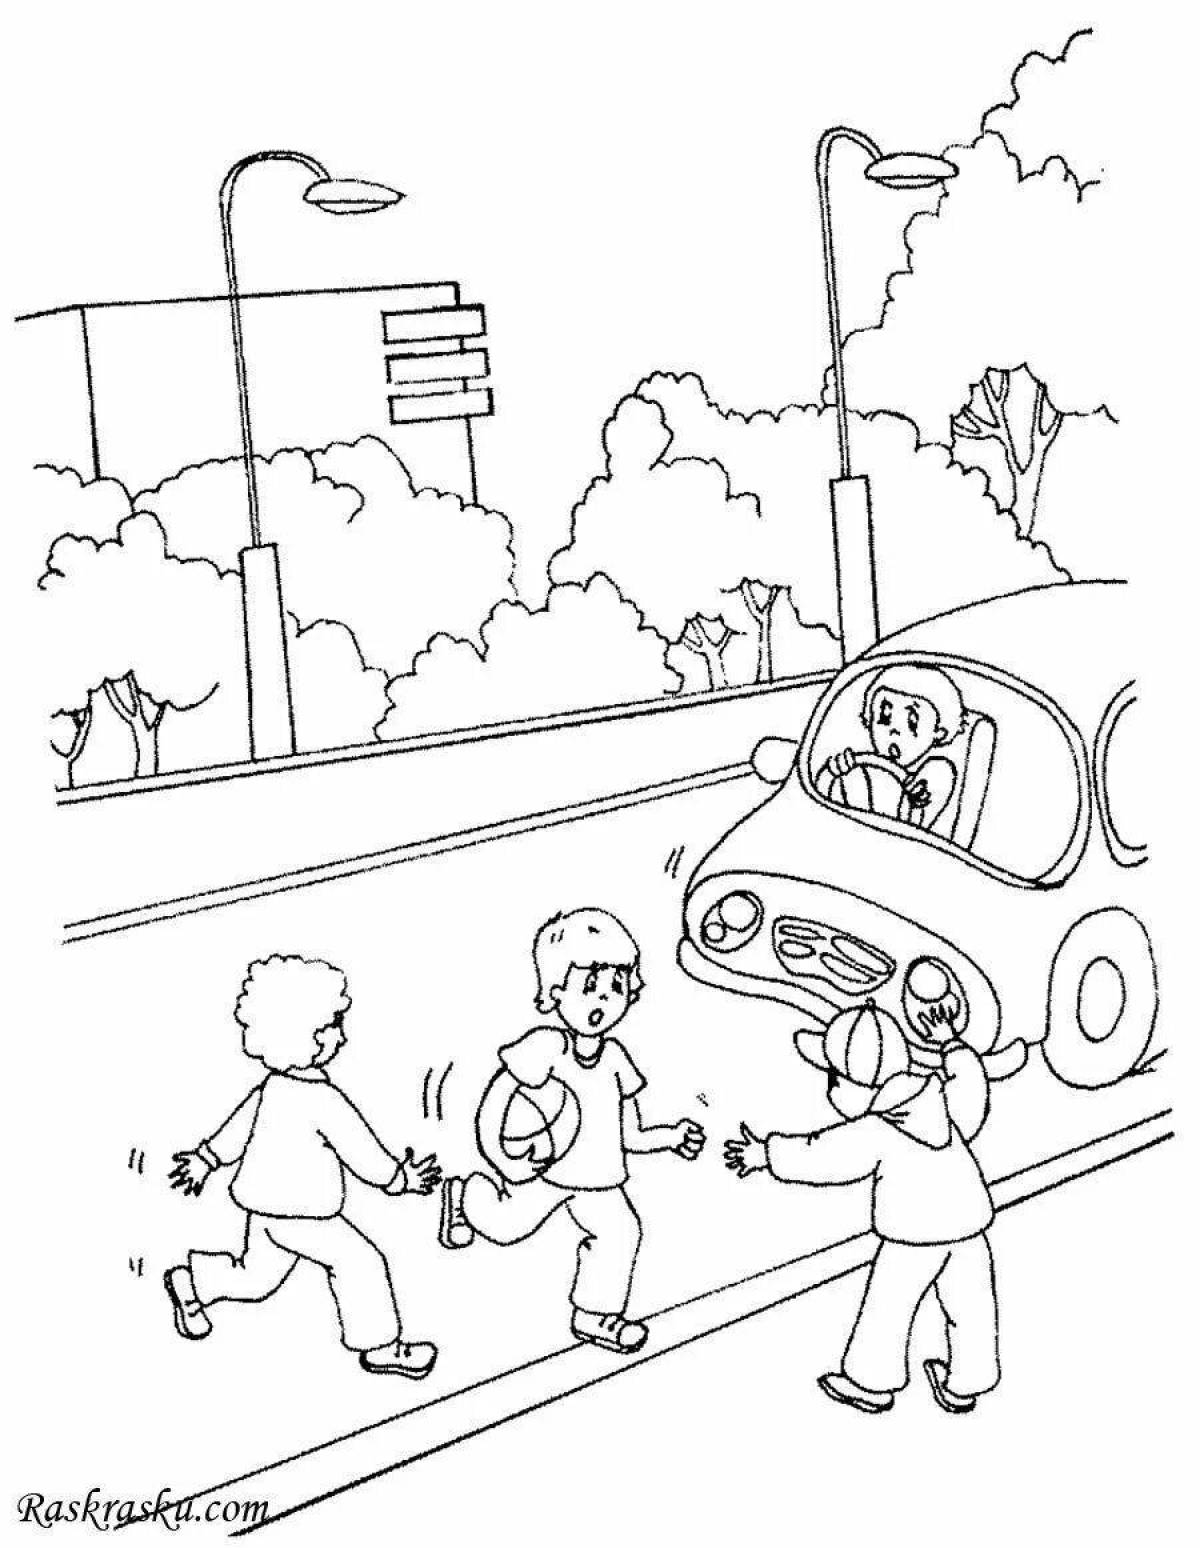 Intriguing traffic safety coloring page